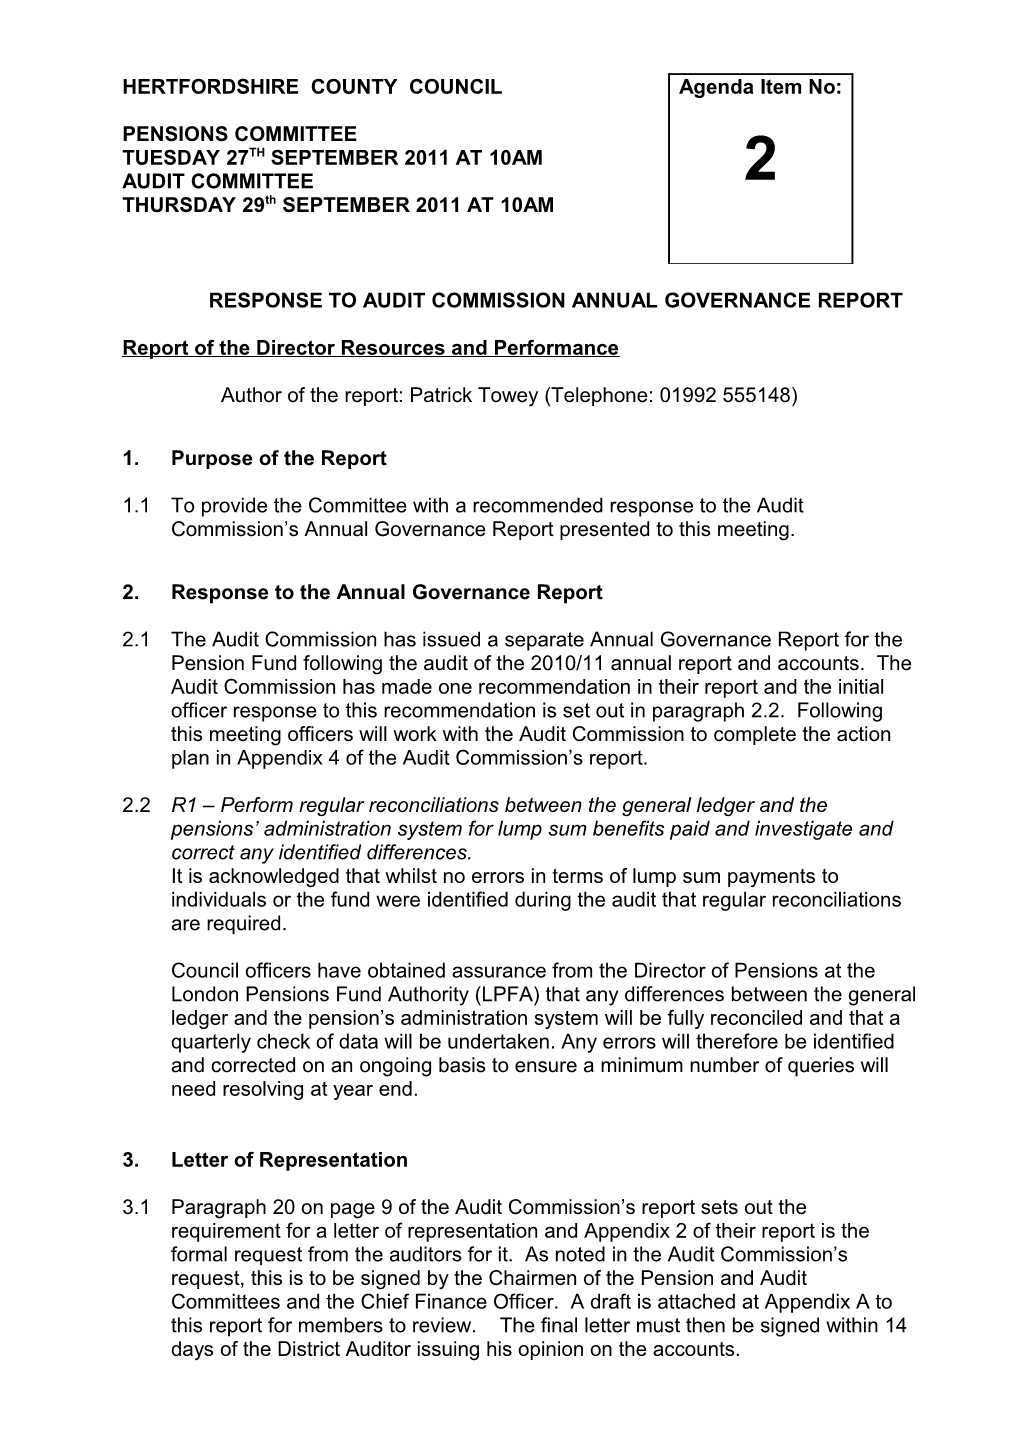 Response to Audit Commission Annual Governance Report